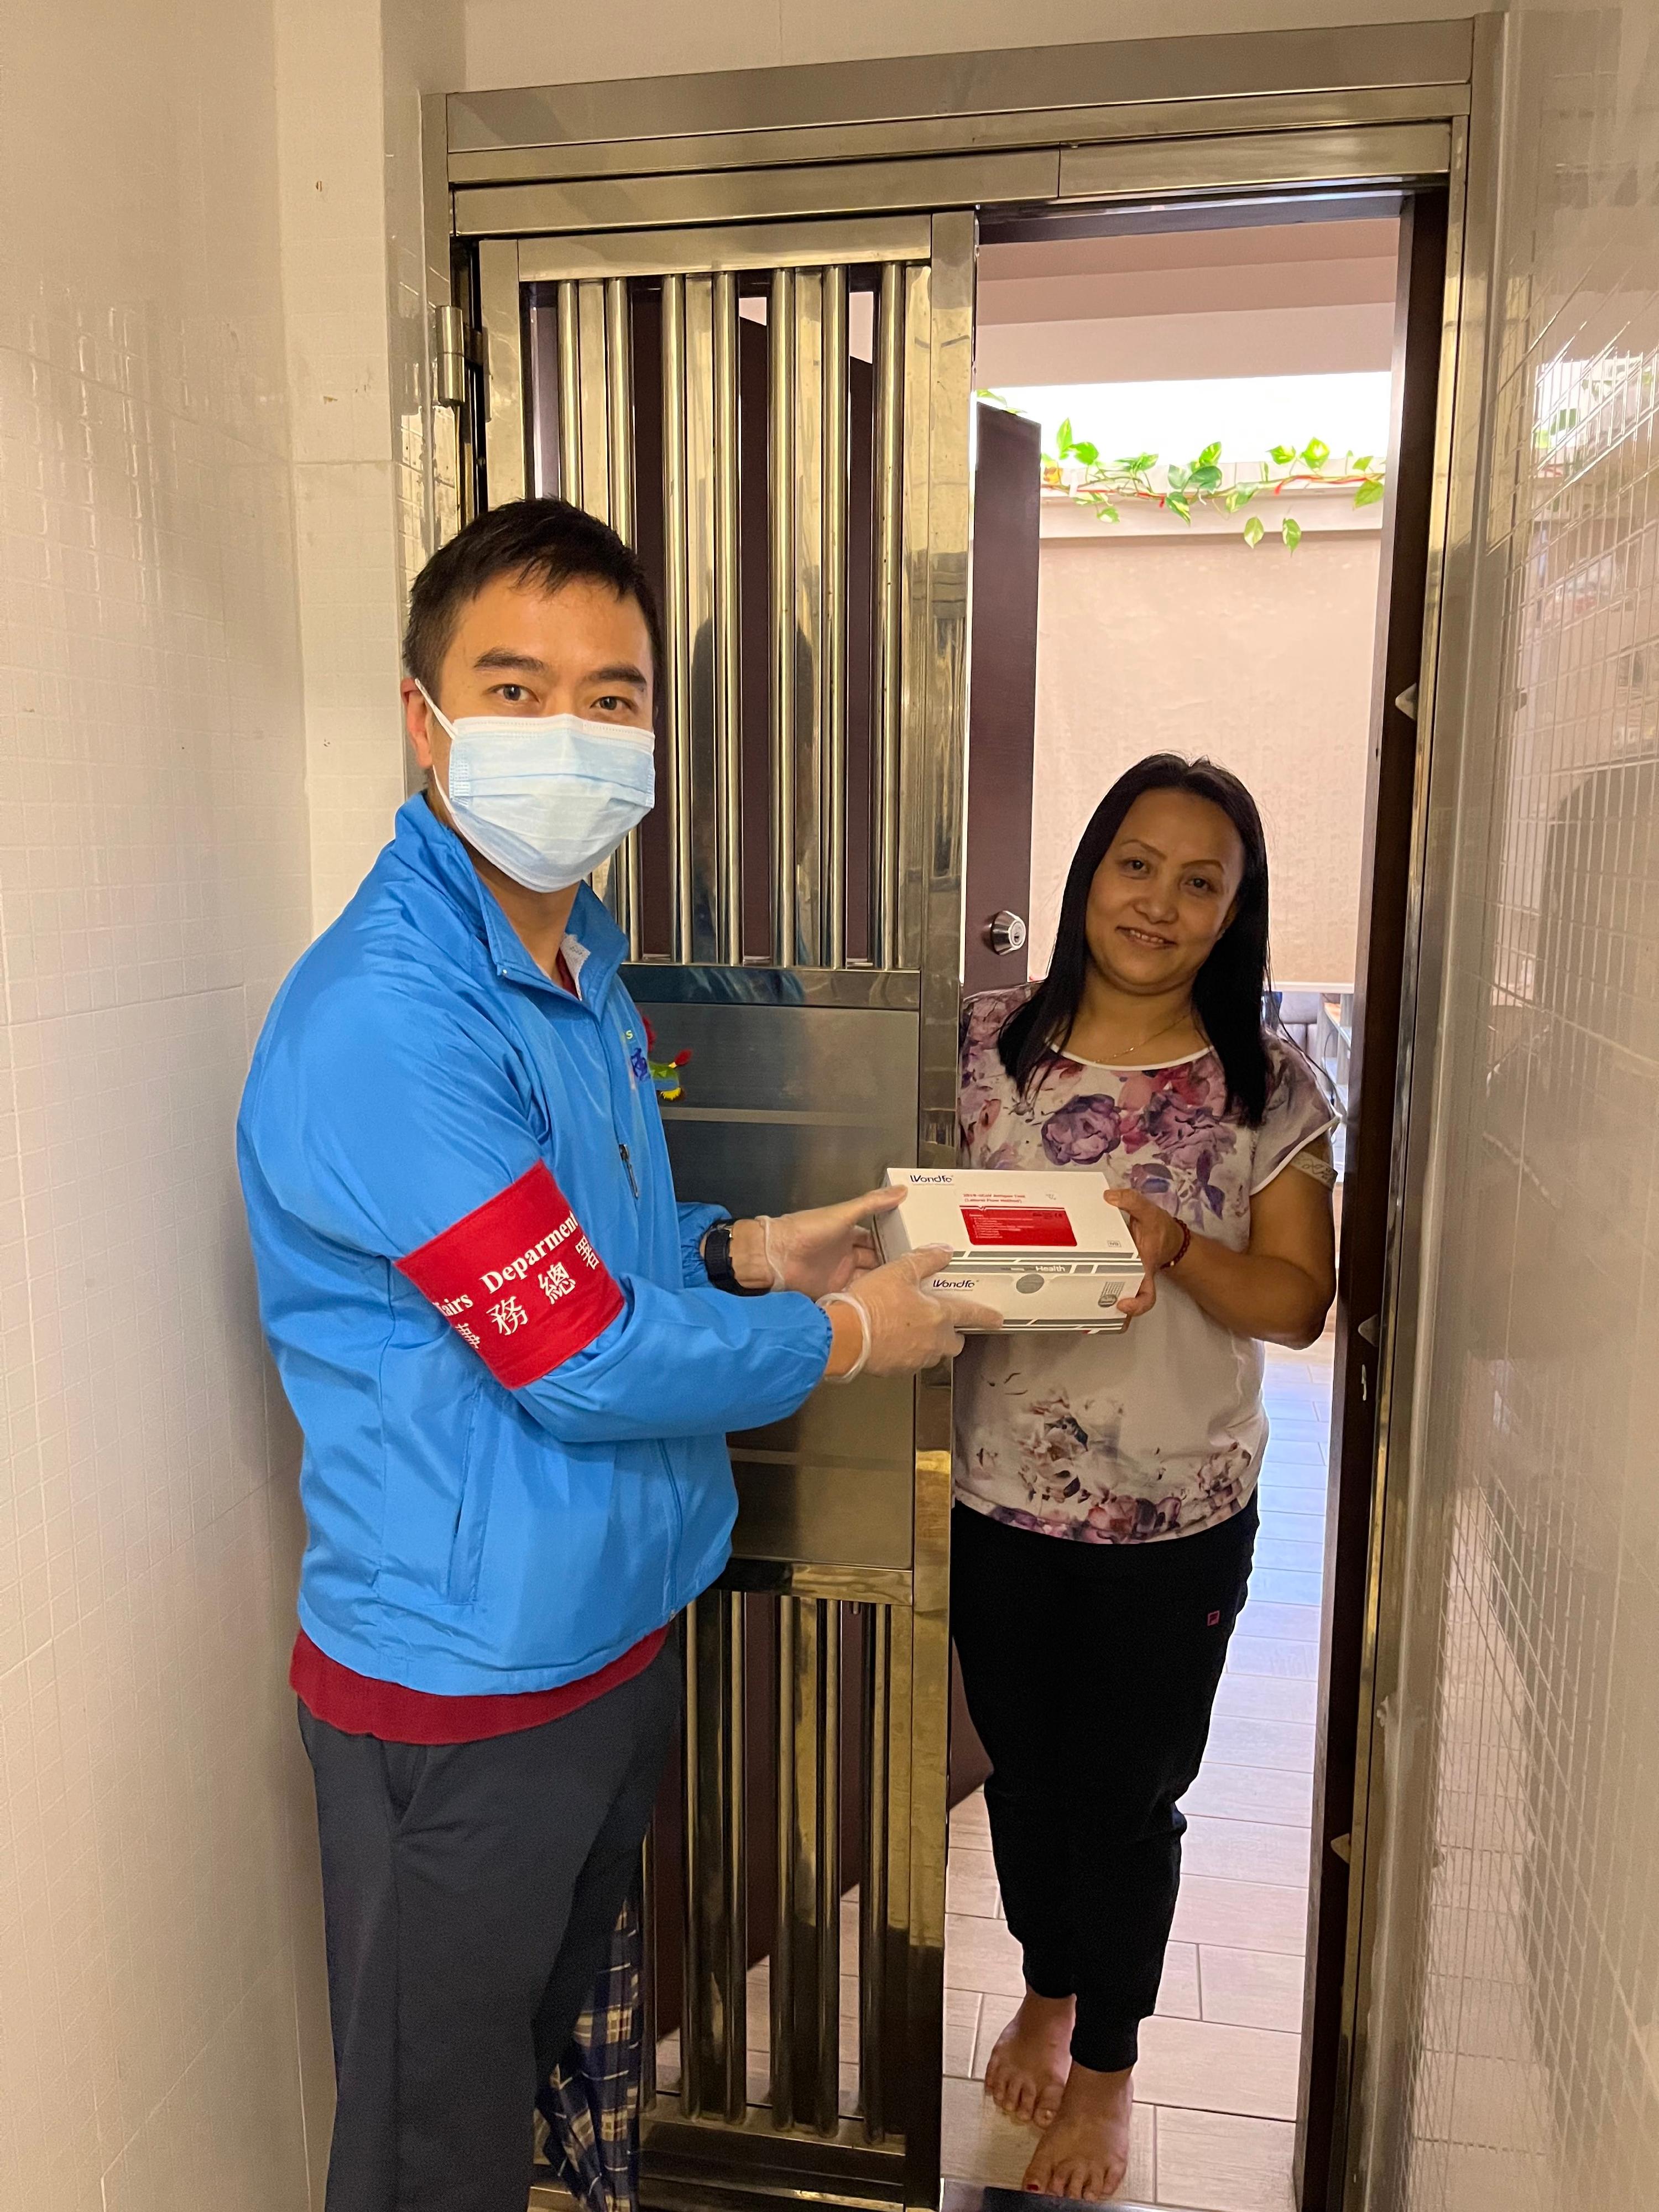 The Yau Tsim Mong District Office distributed rapid test kits supplied by the Central Government at residential buildings in the district on March 3. The beneficiaries included ethnic minority residents. Photo shows the District Officer (Yau Tsim Mong), Mr Edward Yu (left), distributing rapid test kits to an ethnic minority resident.
